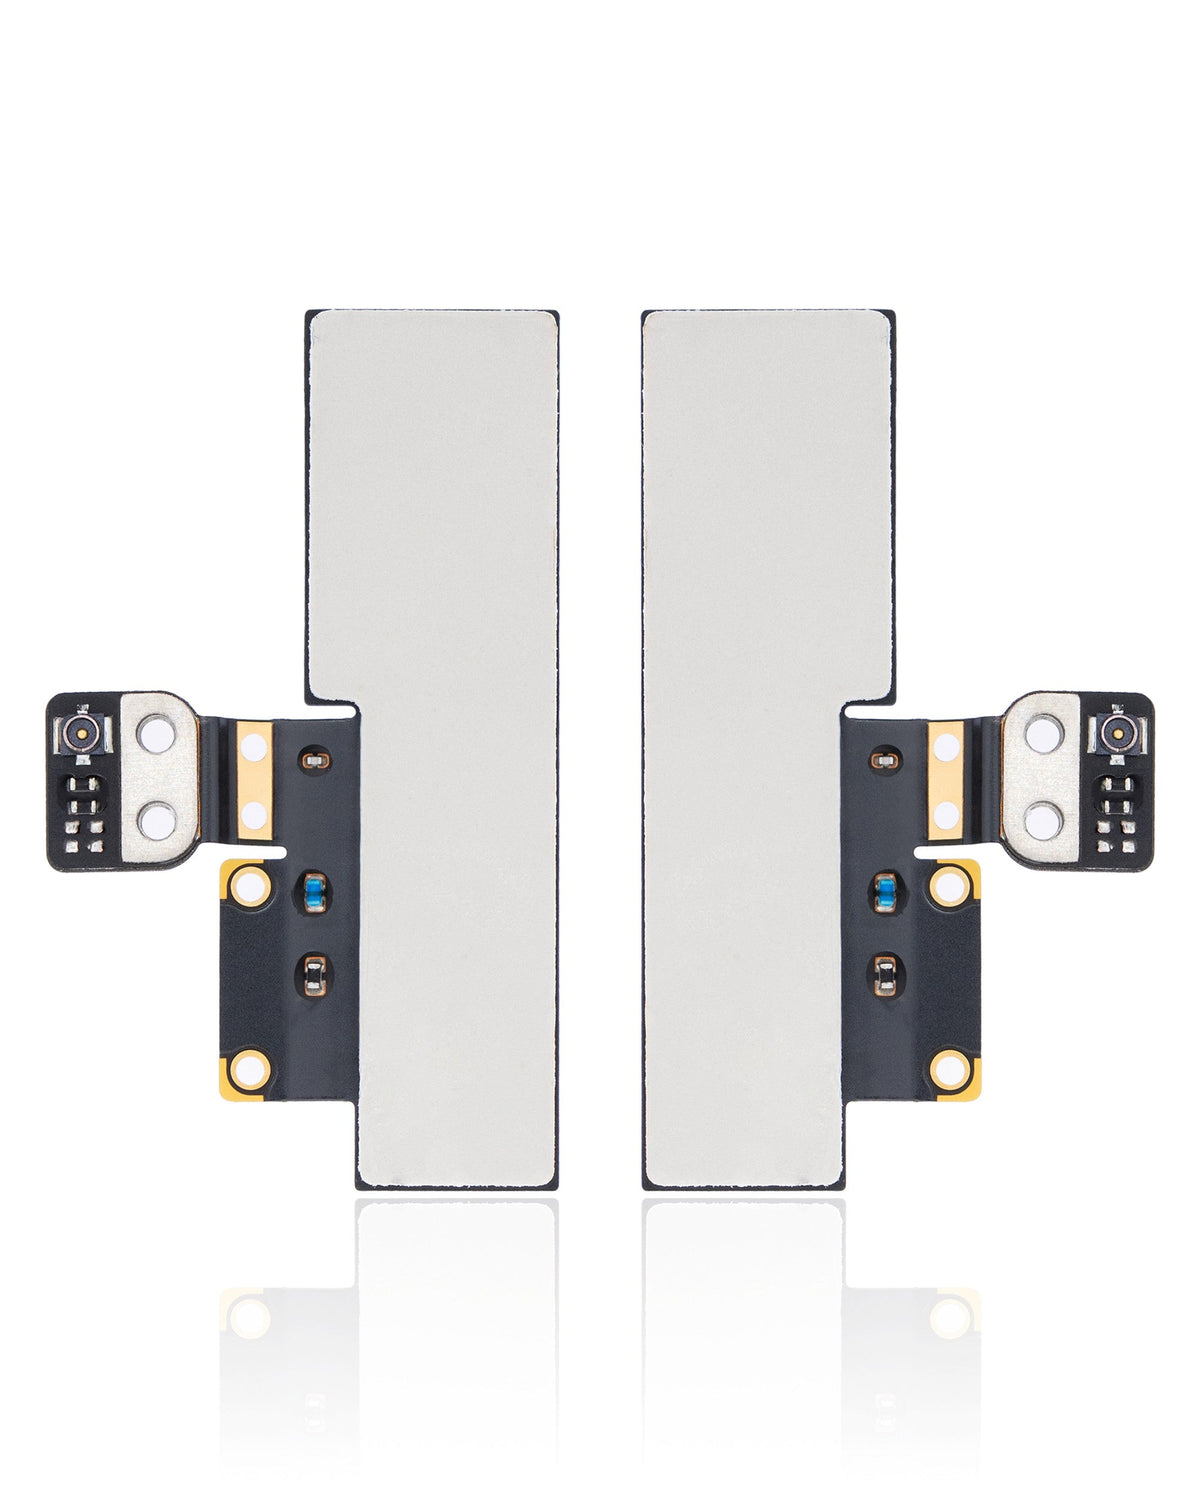 LEFT & RIGHT ANTENNA FLEX CABLE (2 PIECE SET) COMPATIBLE WITH IPAD PRO 9.7" (4G VERSION)